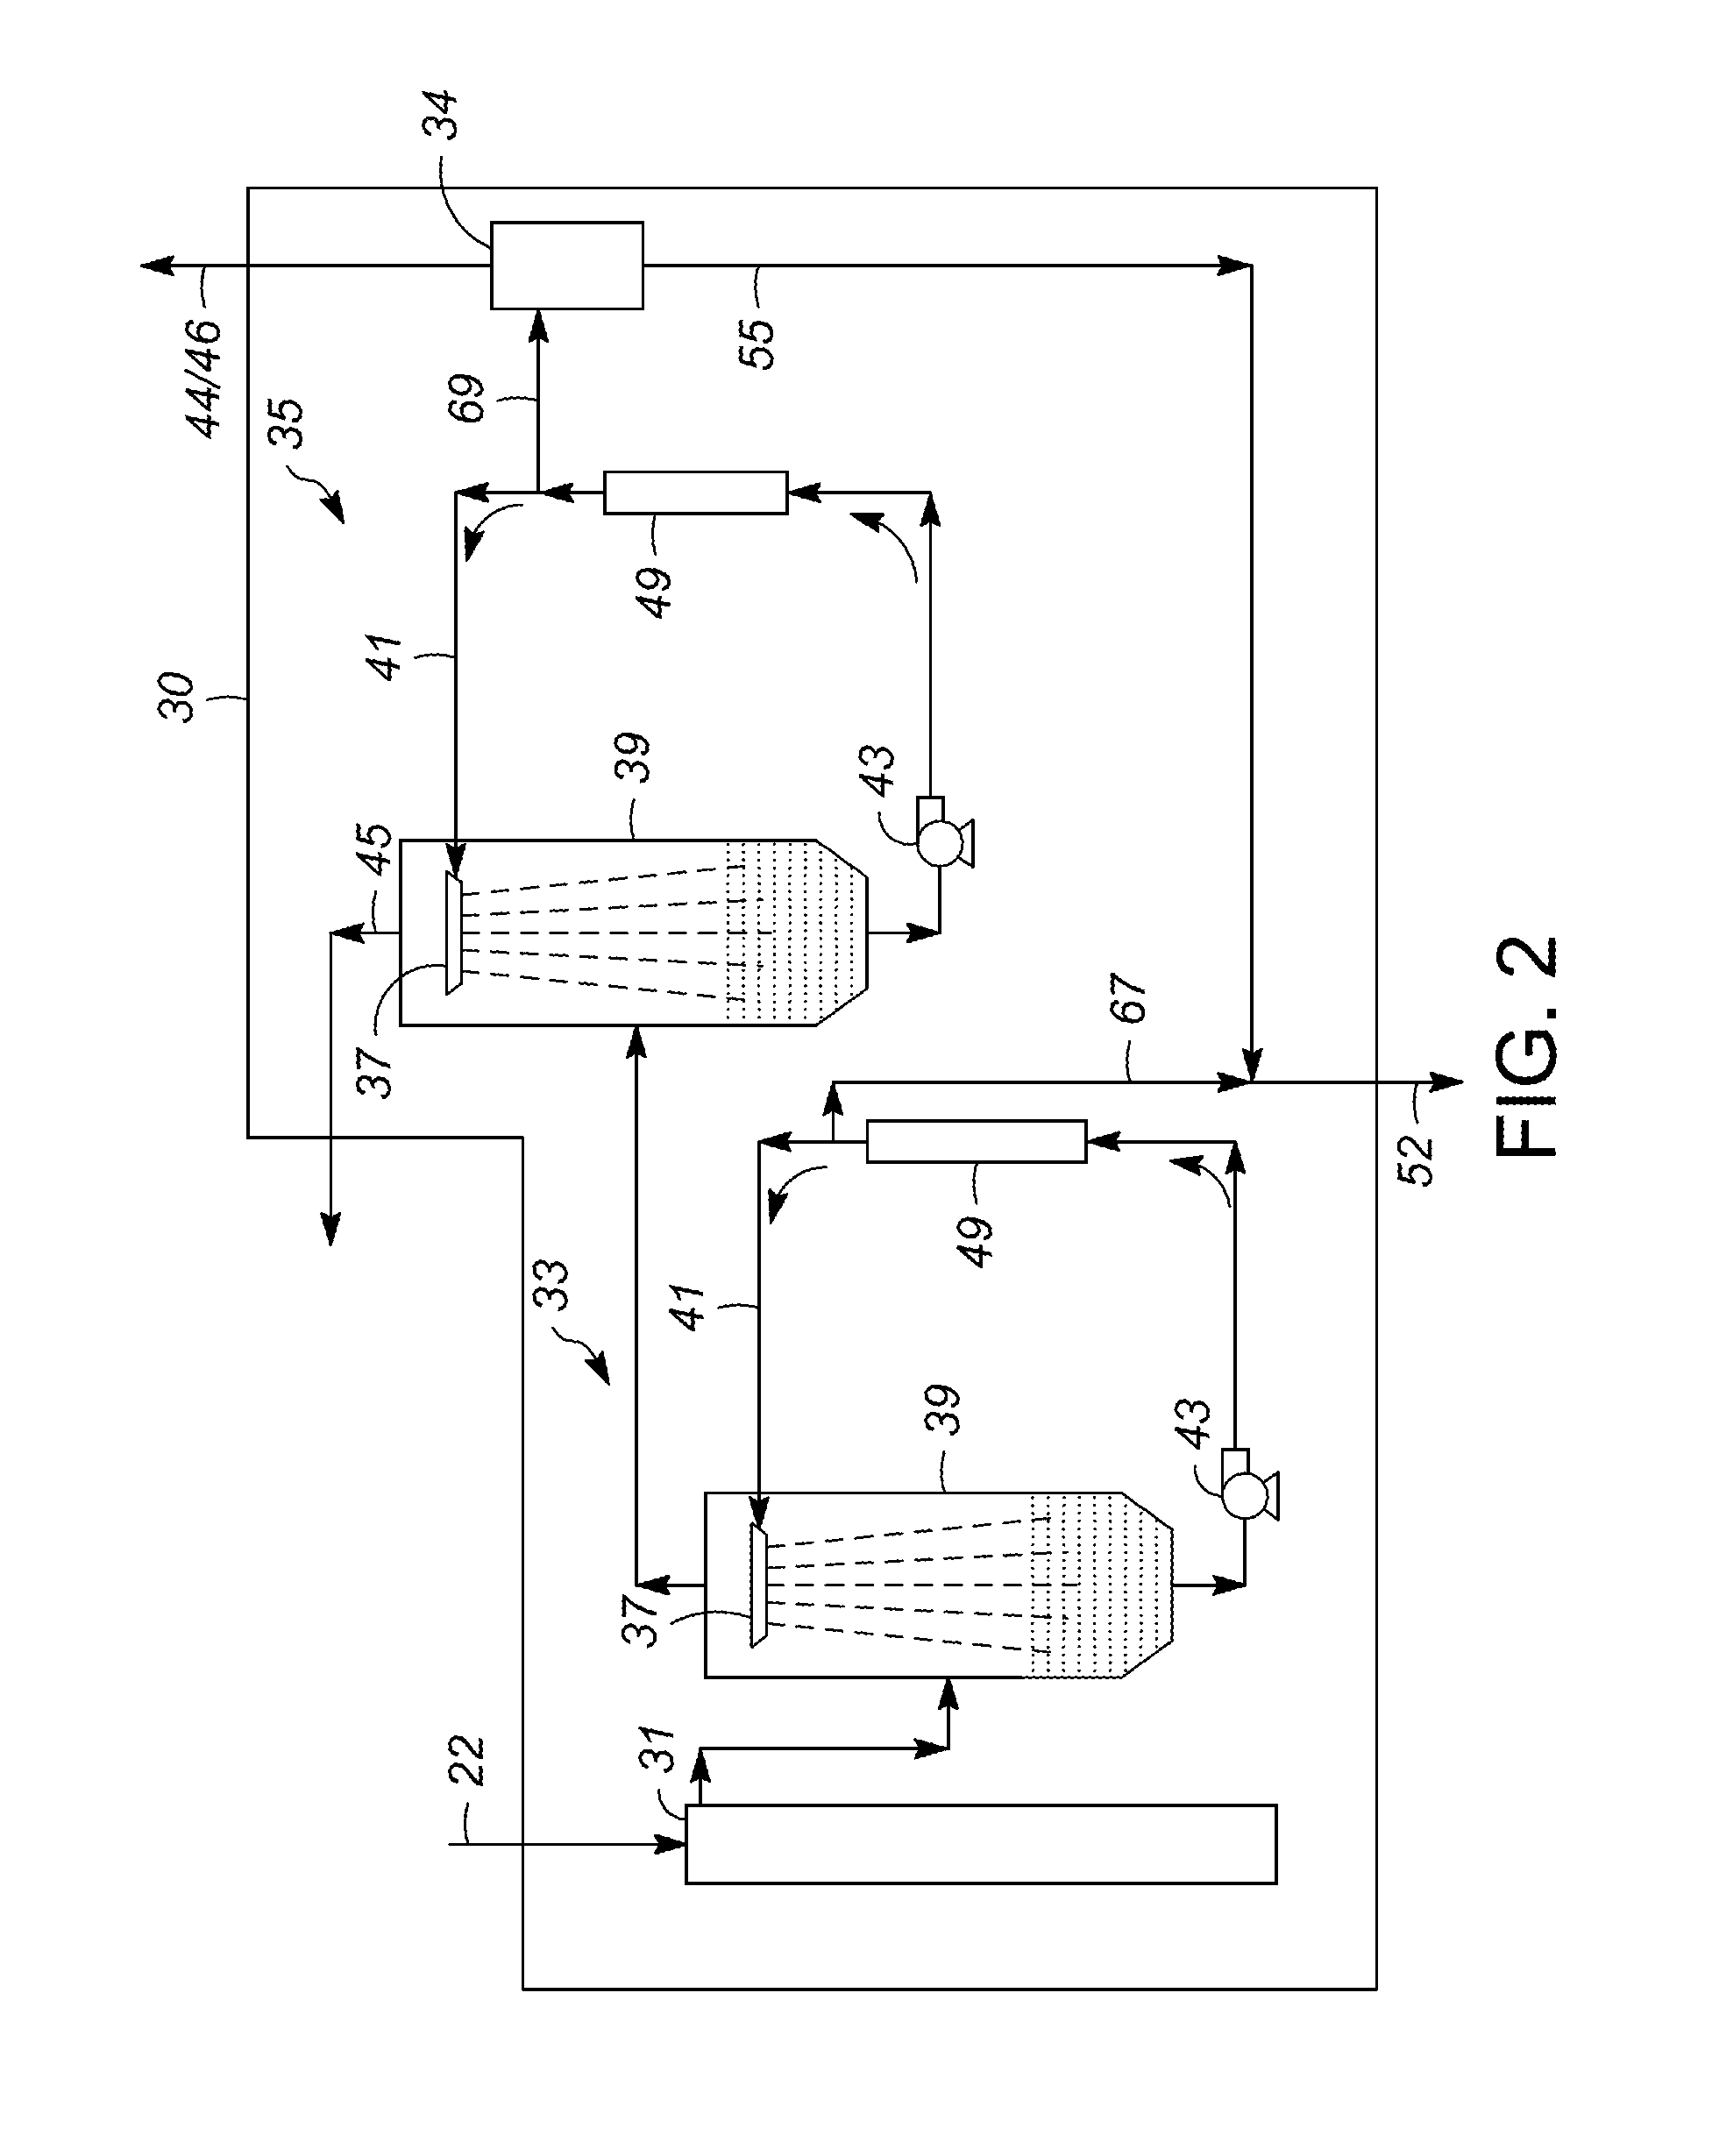 Methods and apparatuses for forming low-metal biomass-derived pyrolysis oil